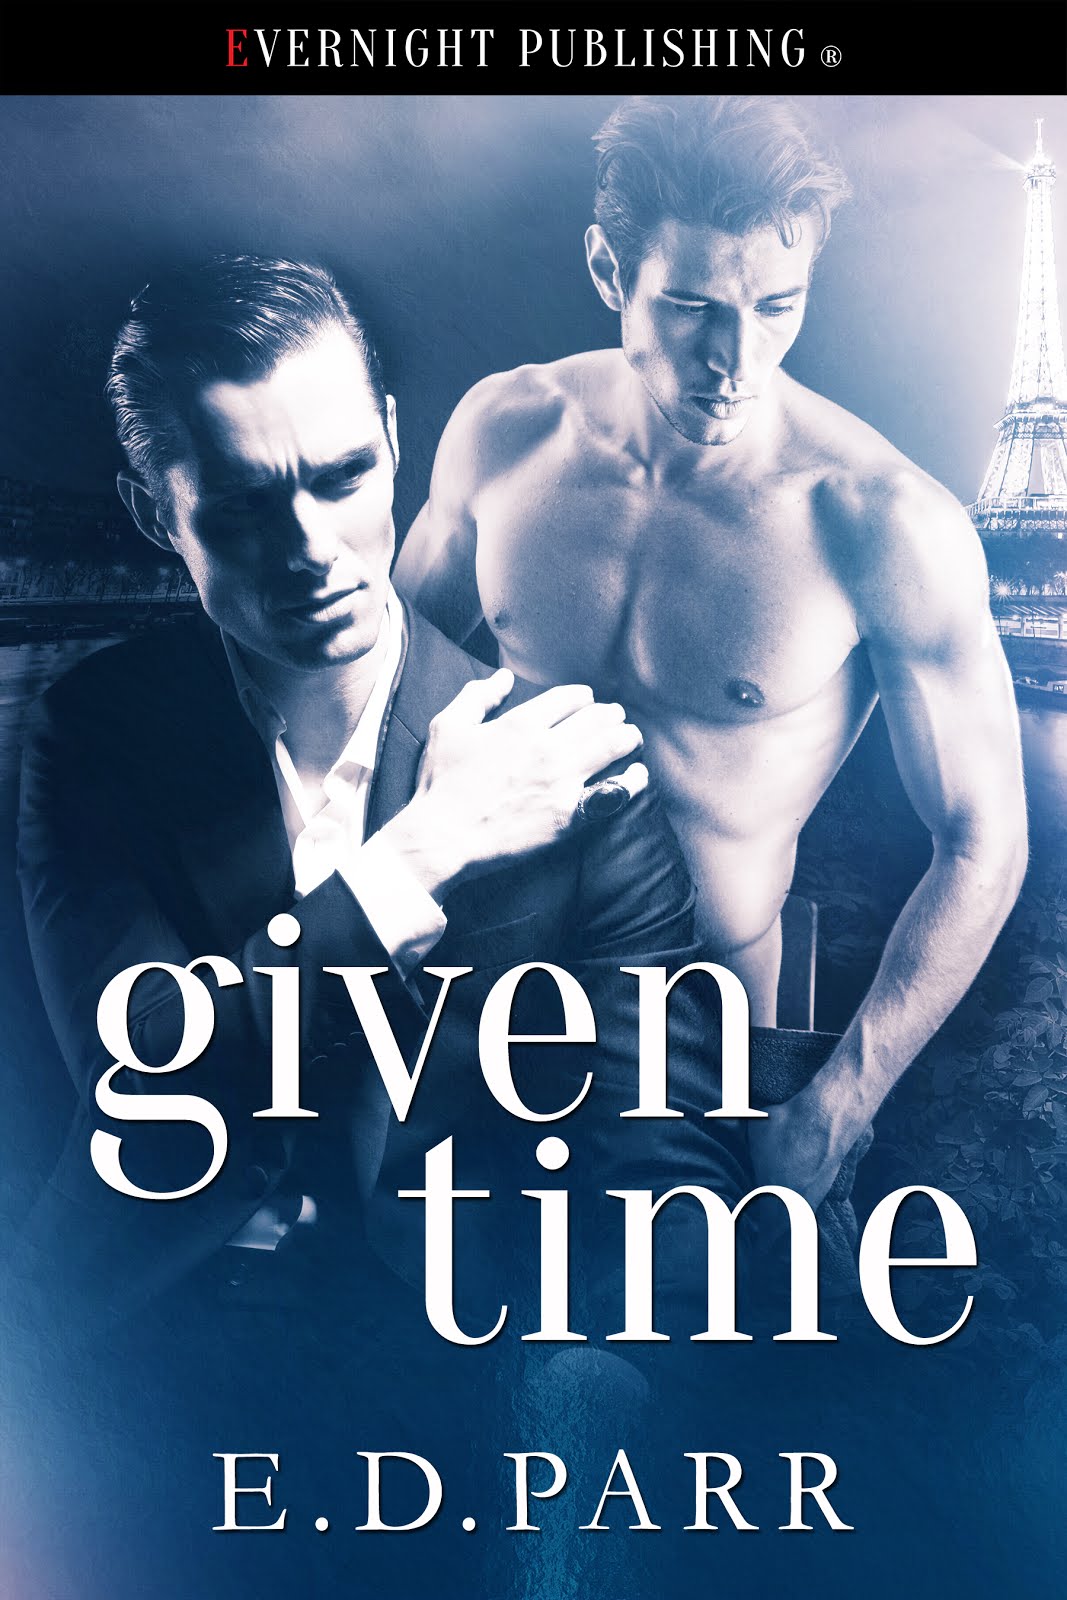 Read an excerpt from Given Time